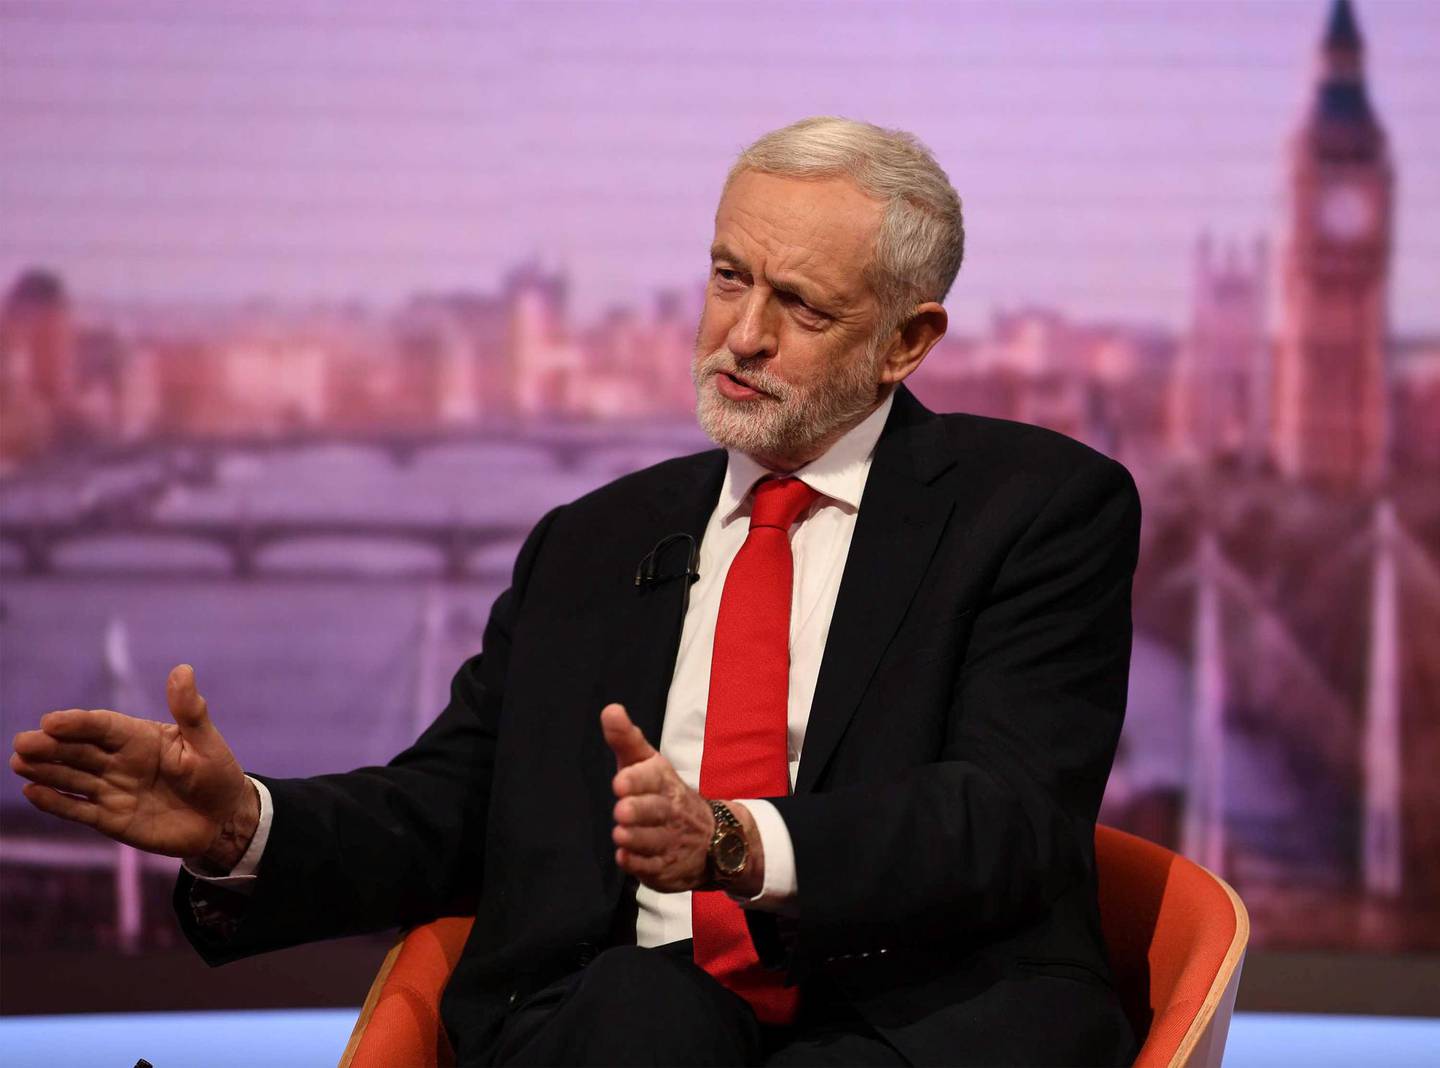 Britain's opposition Labour party leader Jeremy Corbyn appears on the BBC's Andrew Marr Show, in London, Britain January 13, 2019. Jeff Overs/BBC/Handout via REUTERS  THIS IMAGE HAS BEEN SUPPLIED BY A THIRD PARTY. NO RESALES. NO ARCHIVES